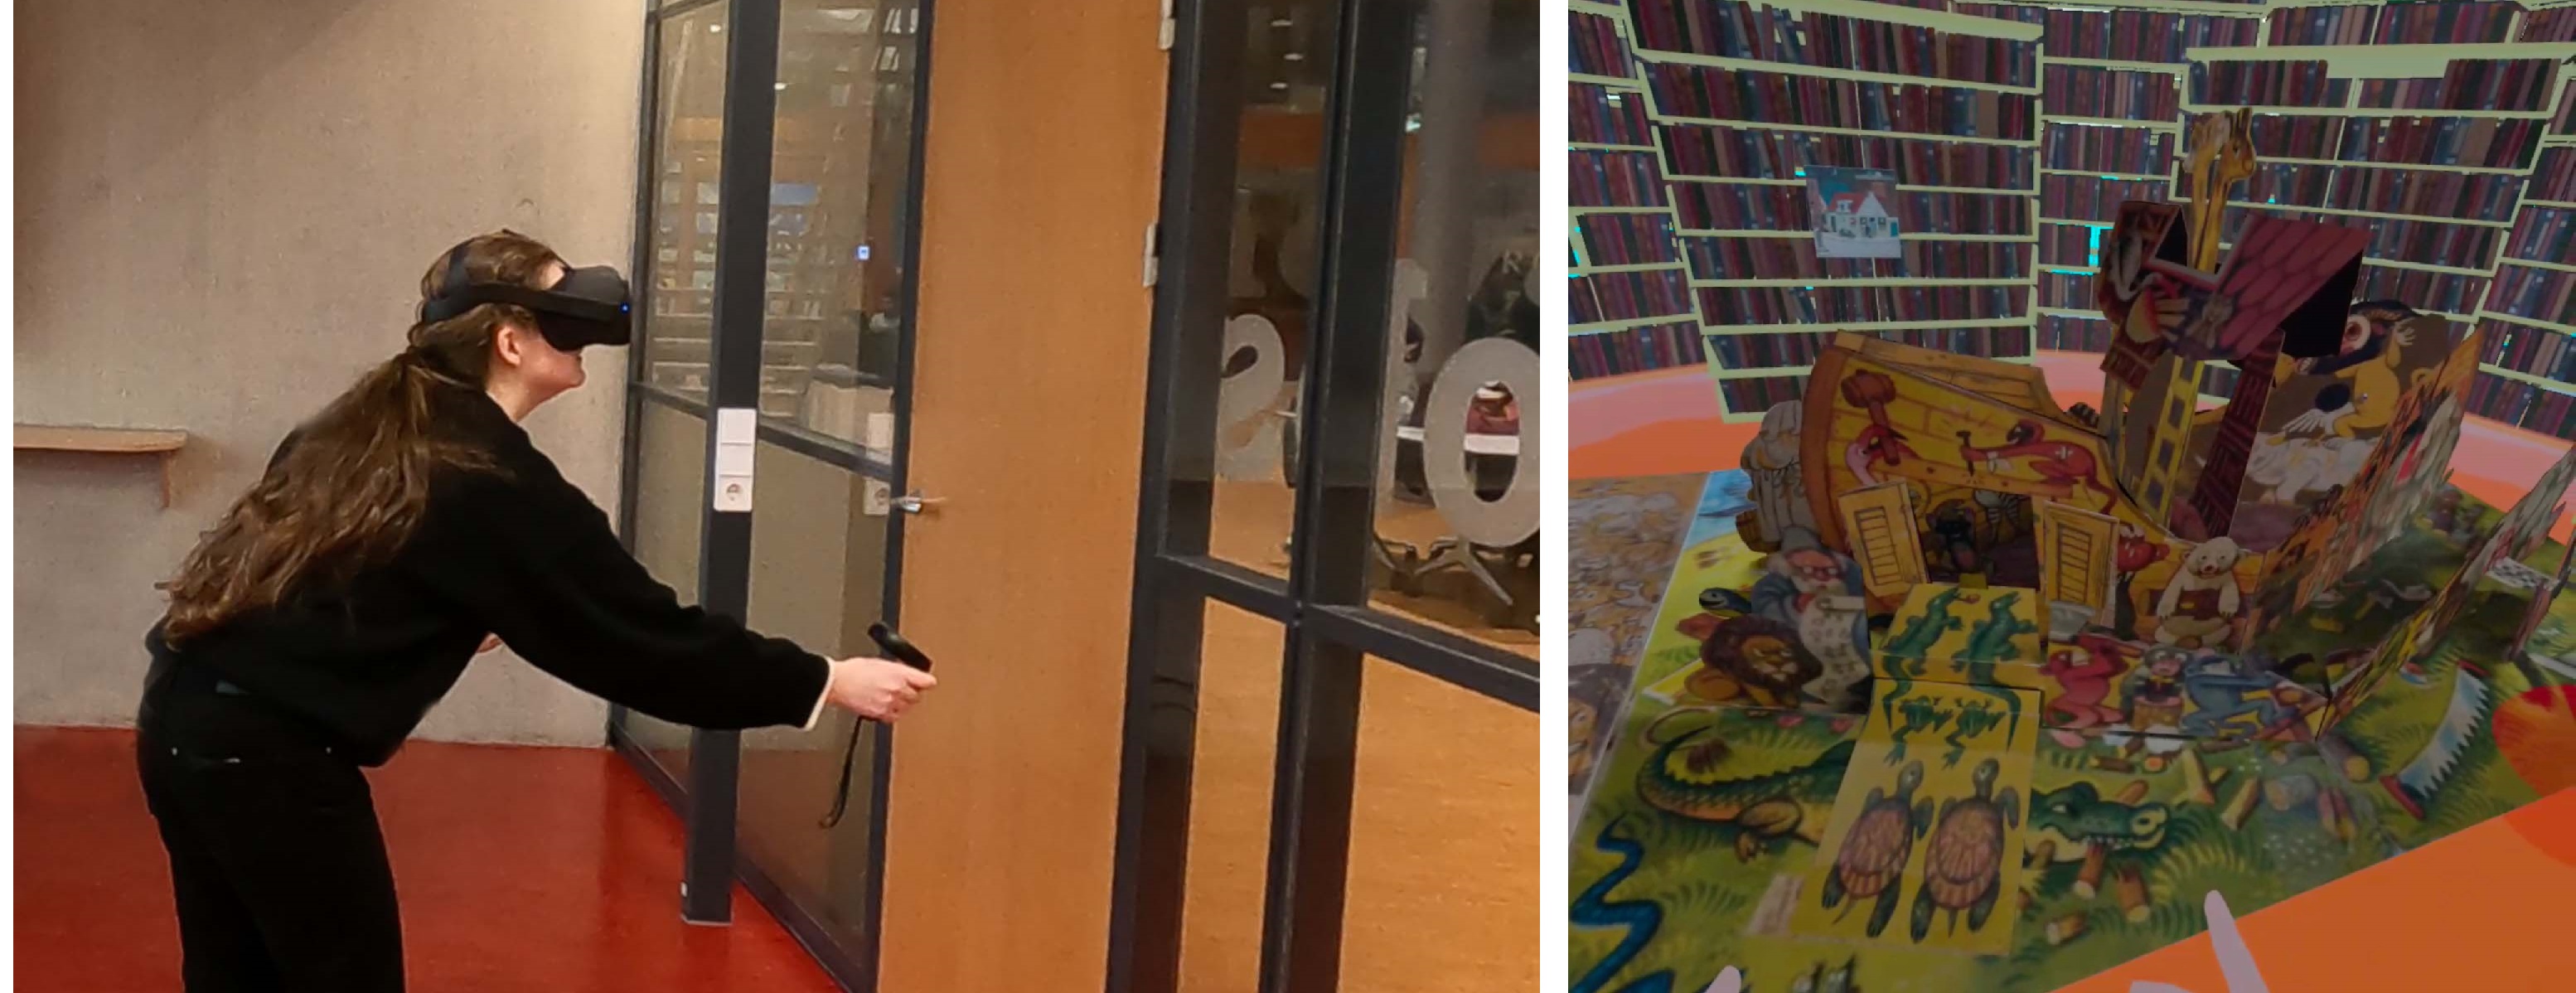 Two images of (left) a person interacting with the VR enviroment en (right) the VR enviroment showing a pop-up book